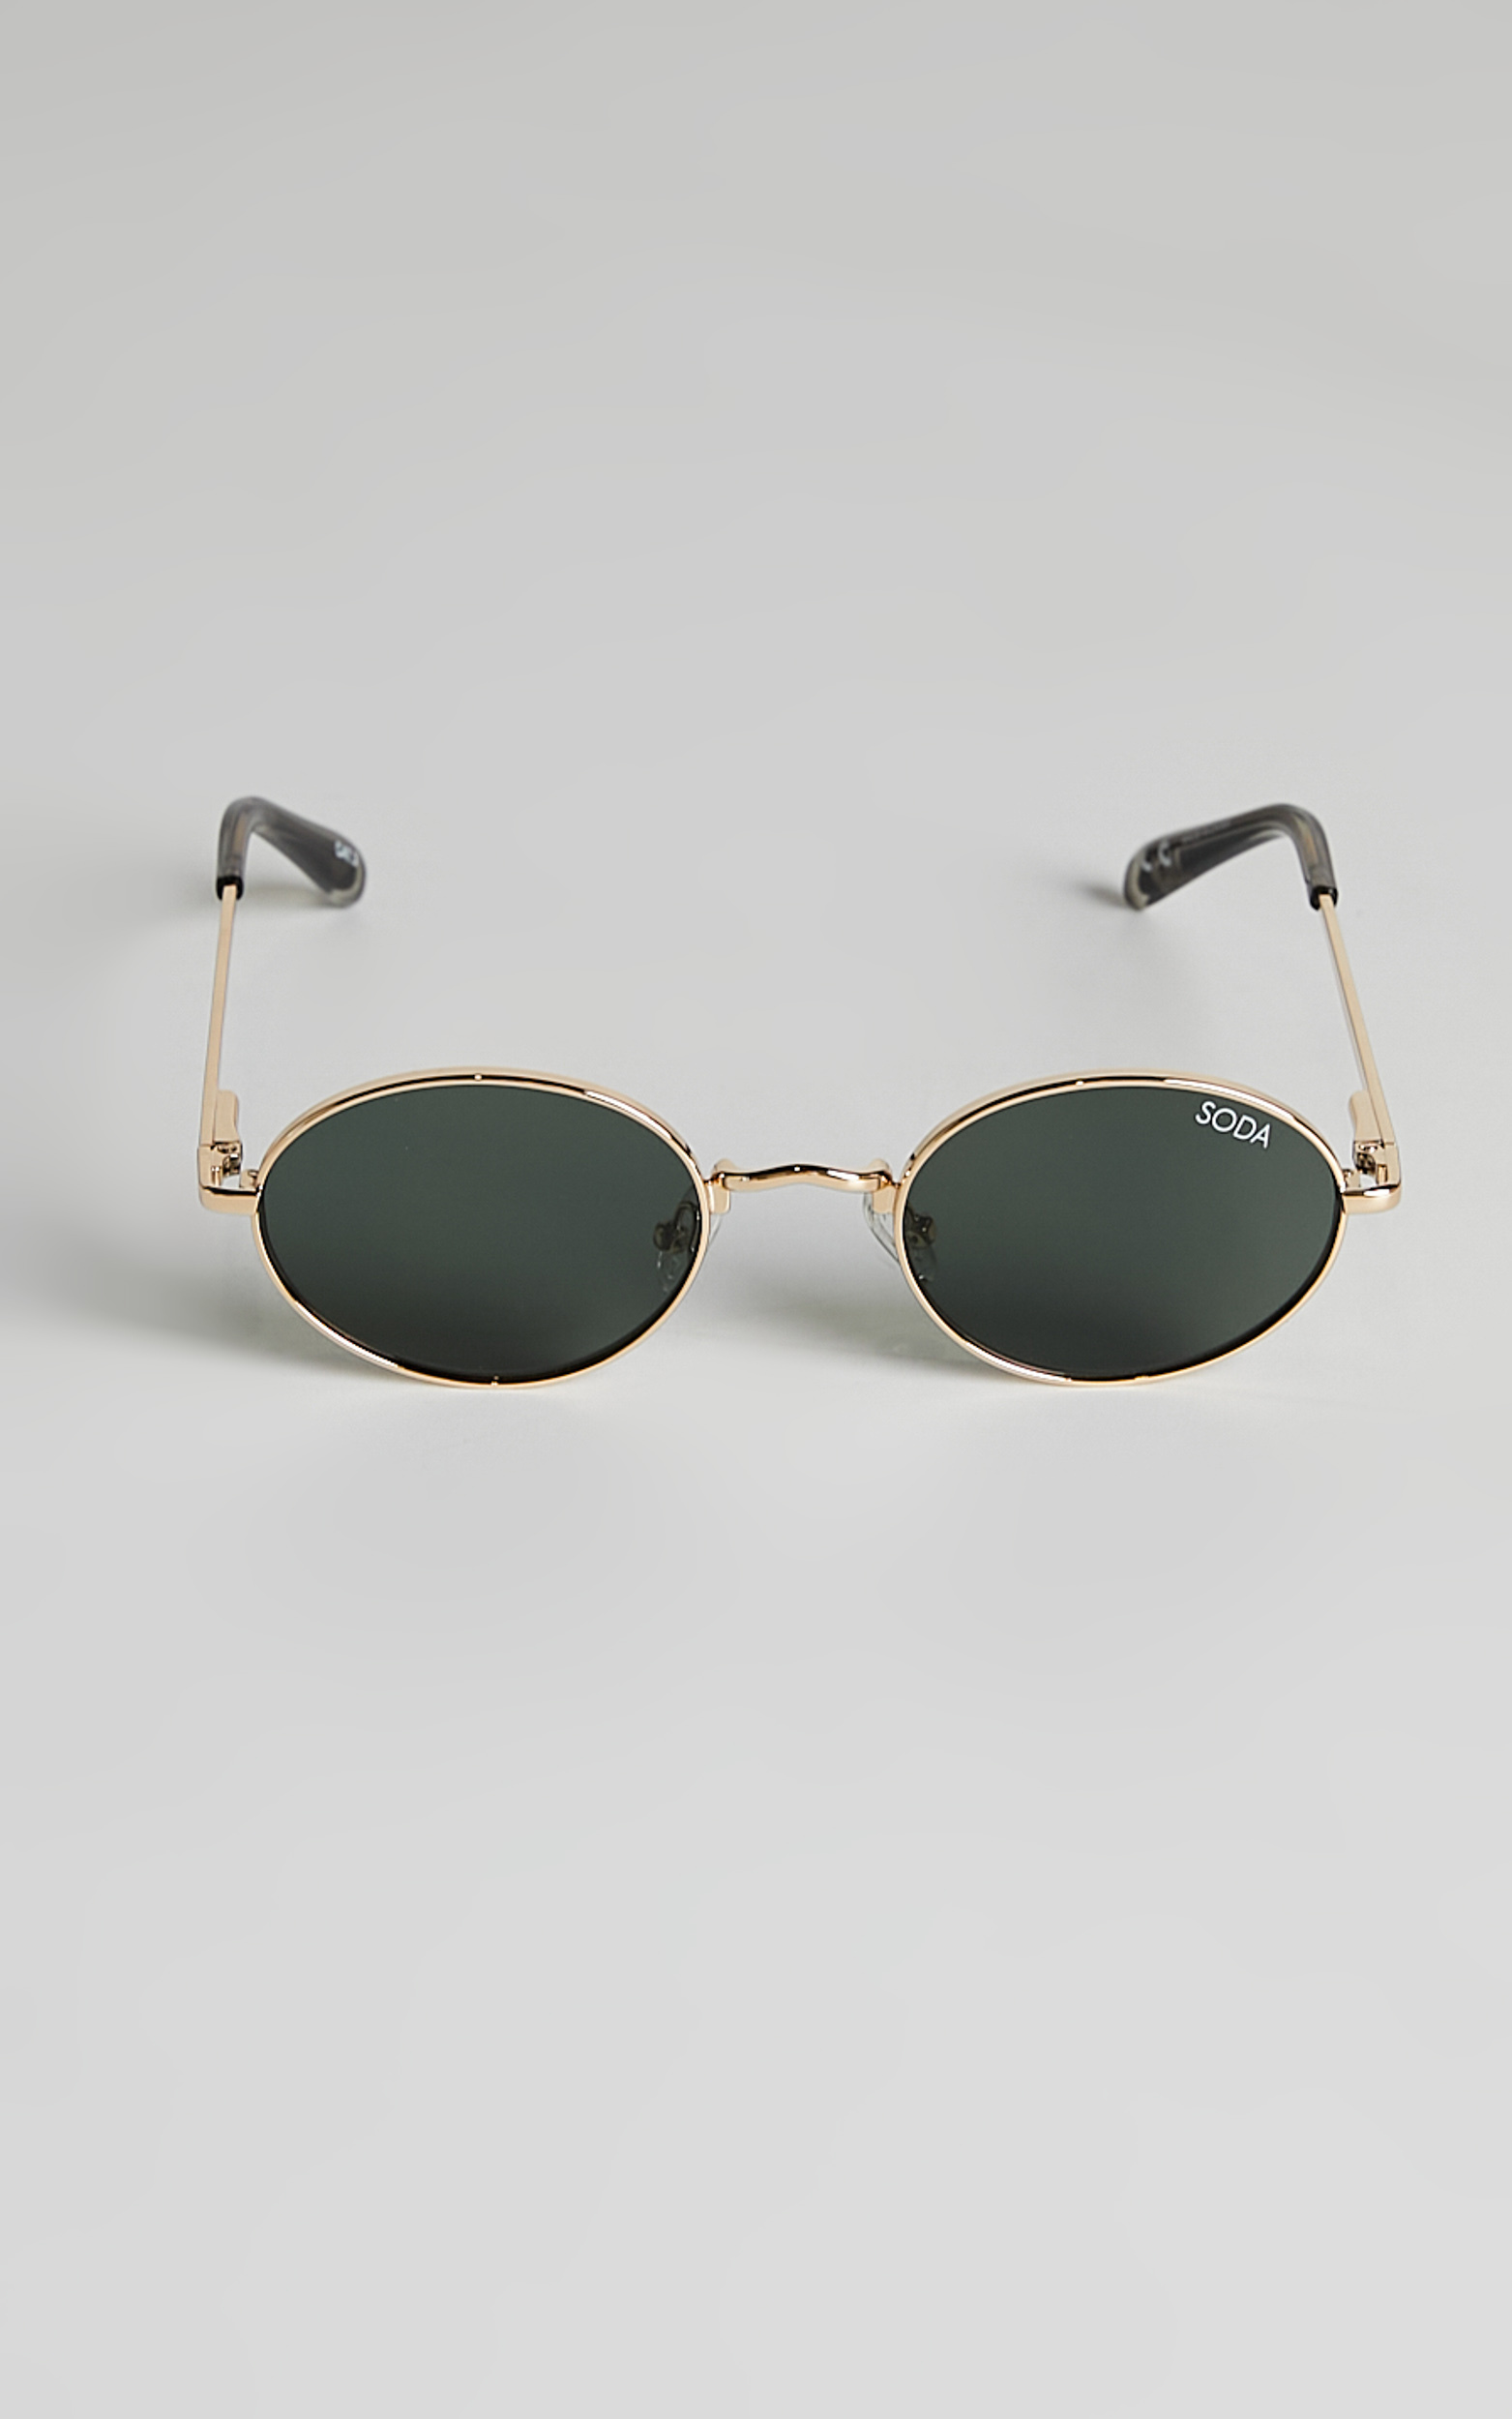 Soda Shades - Charlie Sunglasses in Gold/Green - NoSize, GRN1, hi-res image number null